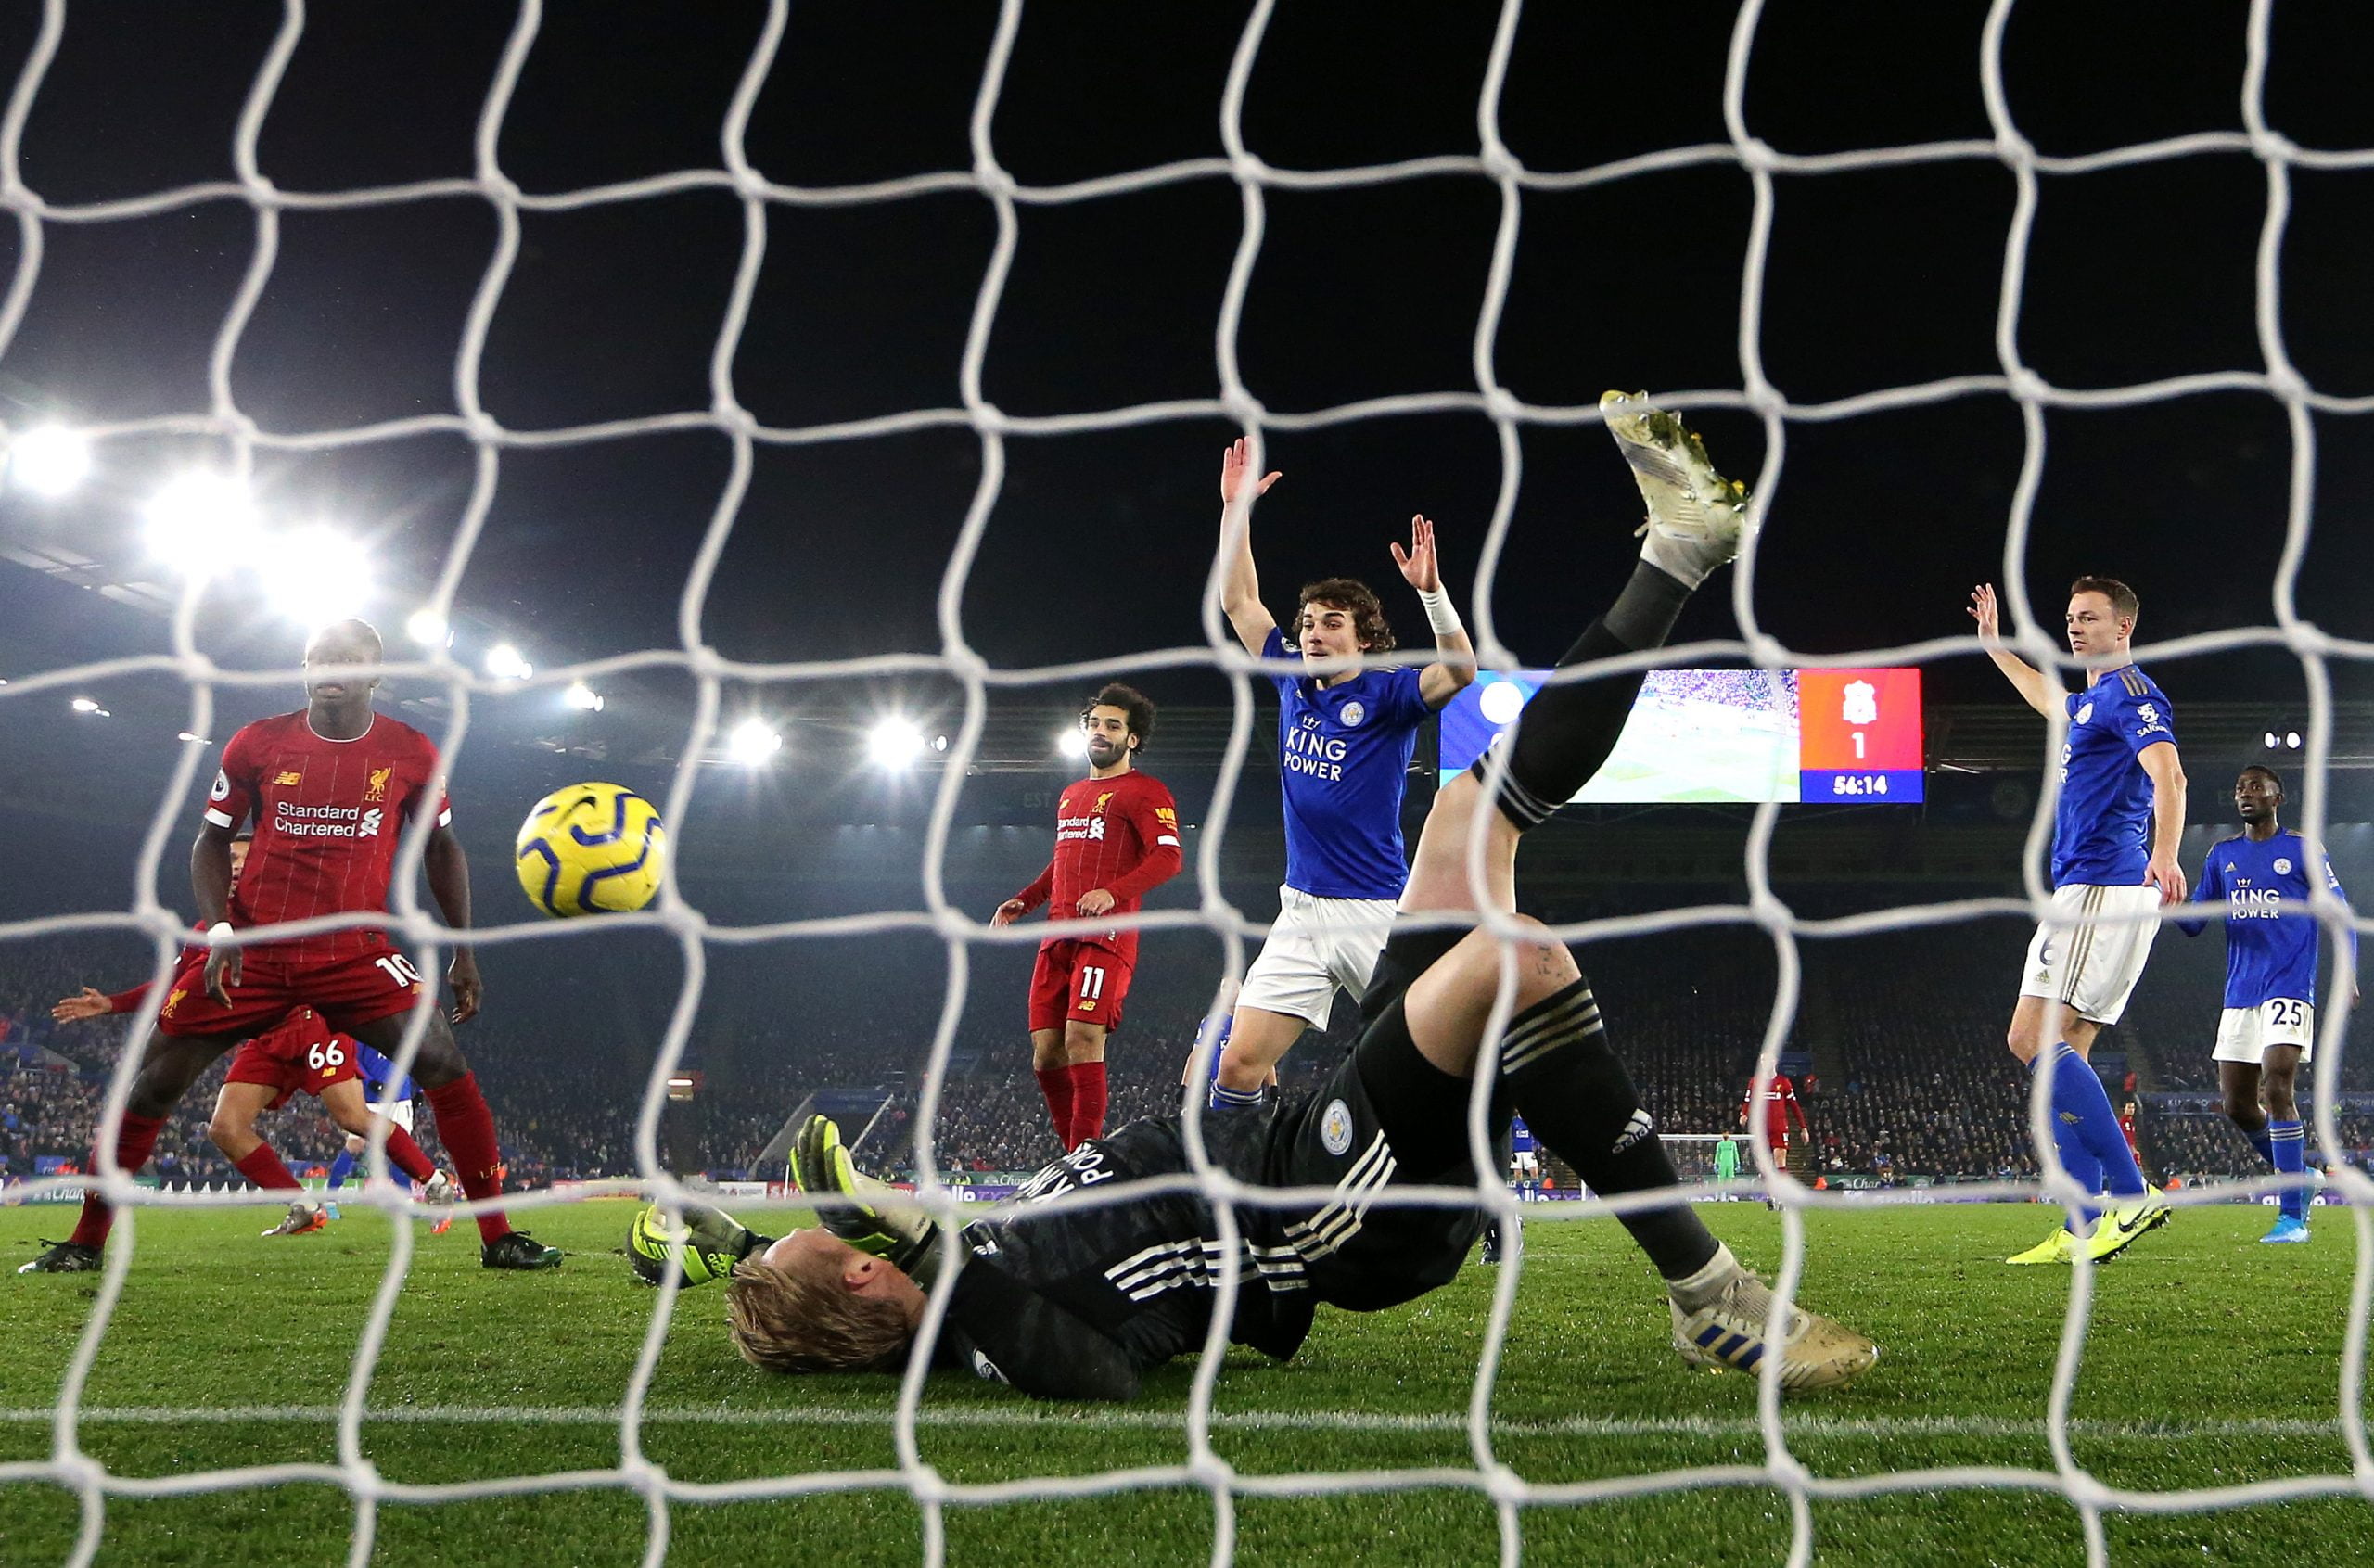 LEICESTER, ENGLAND - DECEMBER 26: Caglar Soyuncu of Leicester City reacts as Kasper Schmeichel of Leicester City makes a save during the Premier League match between Leicester City and Liverpool FC at The King Power Stadium on December 26, 2019 in Leicester, United Kingdom. (Photo by Alex Pantling/Getty Images)